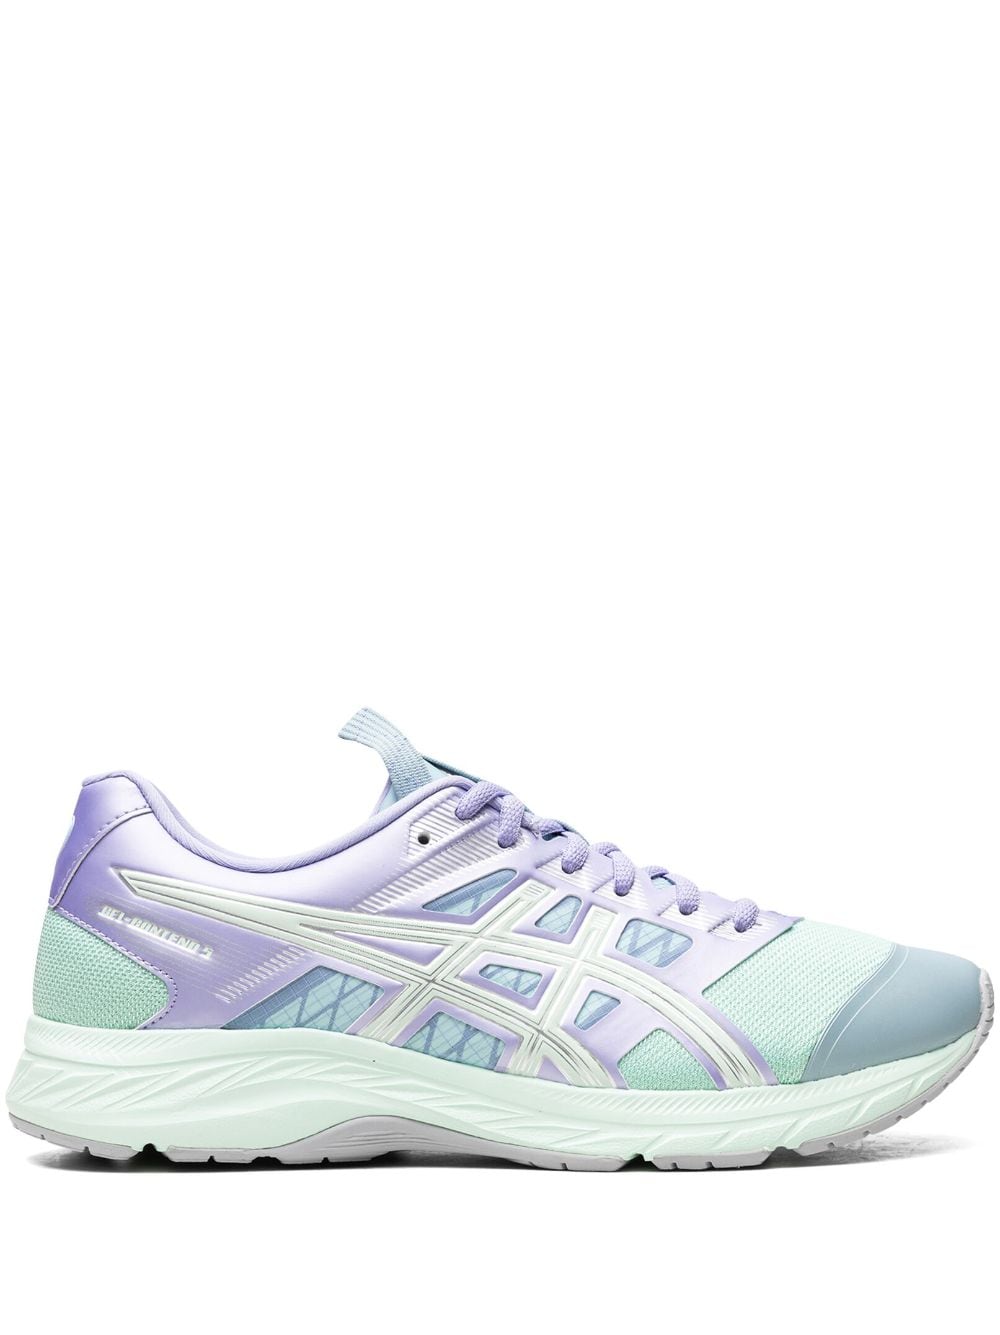 ASICS FNS-S Gel-Contend 5 "Mint Tint" sneakers - Blue von ASICS